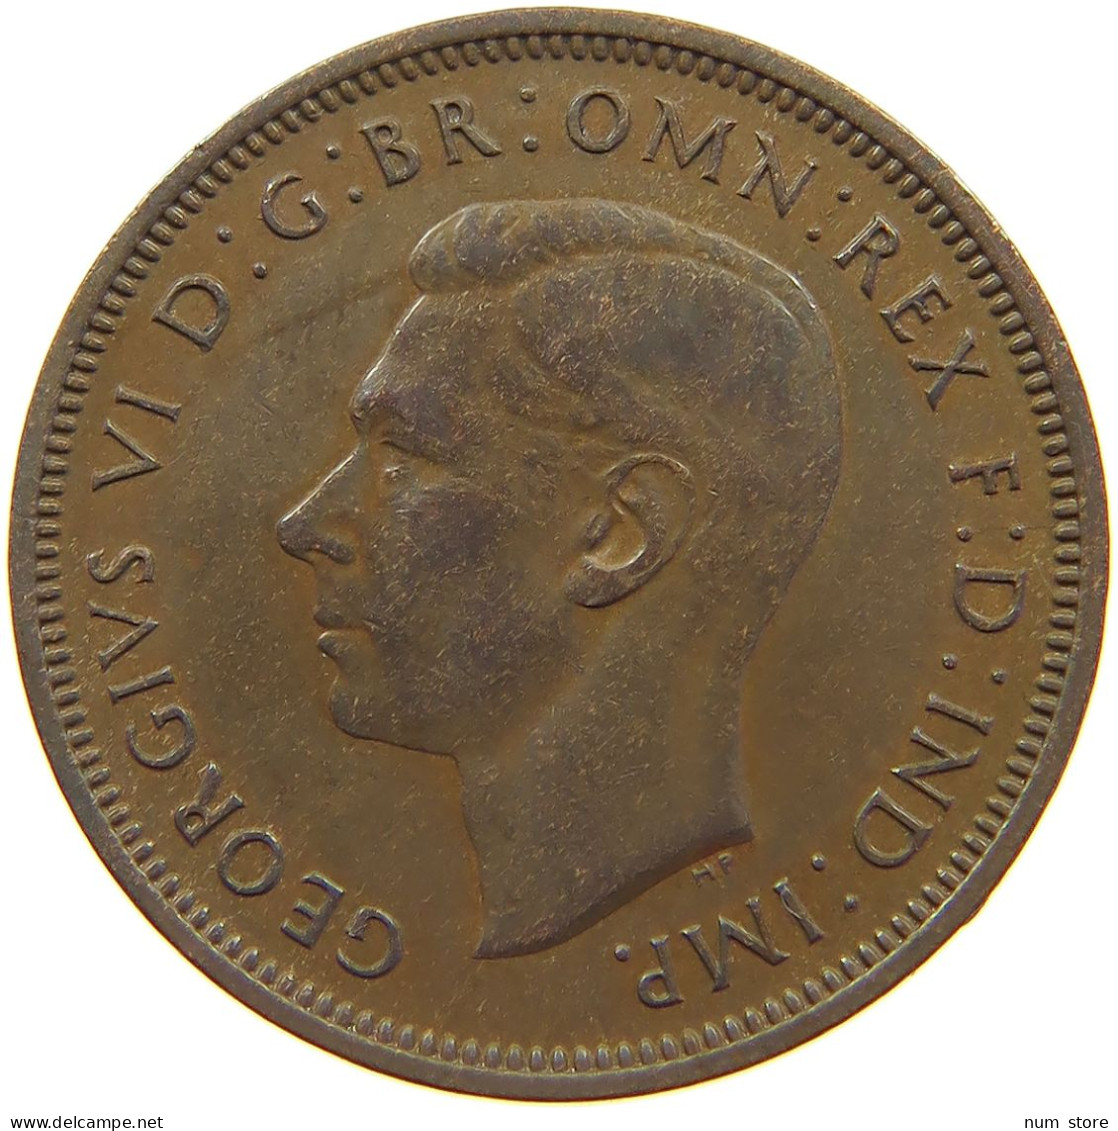 GREAT BRITAIN HALFPENNY 1947 #a066 0241 - C. 1/2 Penny